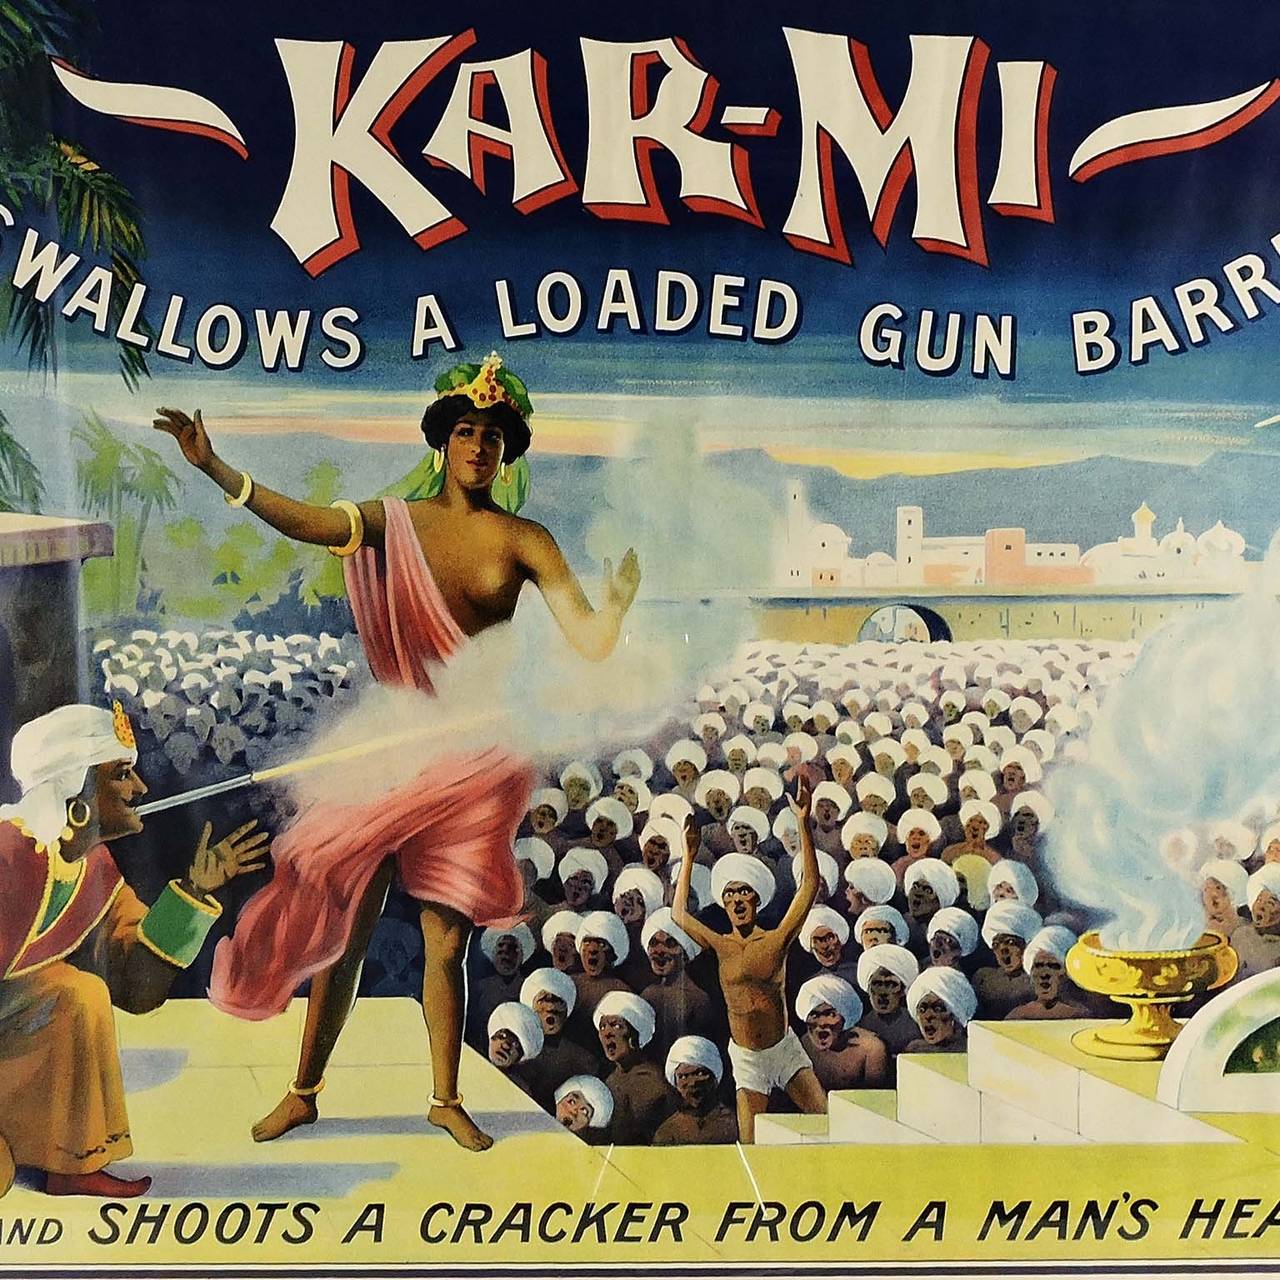 JOSEPH B. HALLWORTH (1872-1957).
Kar-Mi Swallows a Loaded Gun Barrel and Shoots a Cracker From a Man's Head, c. 1914
Color lithograph poster, published by National Printing and Engraving Co., New York, Chicago and St. Louis, and copyrighted by